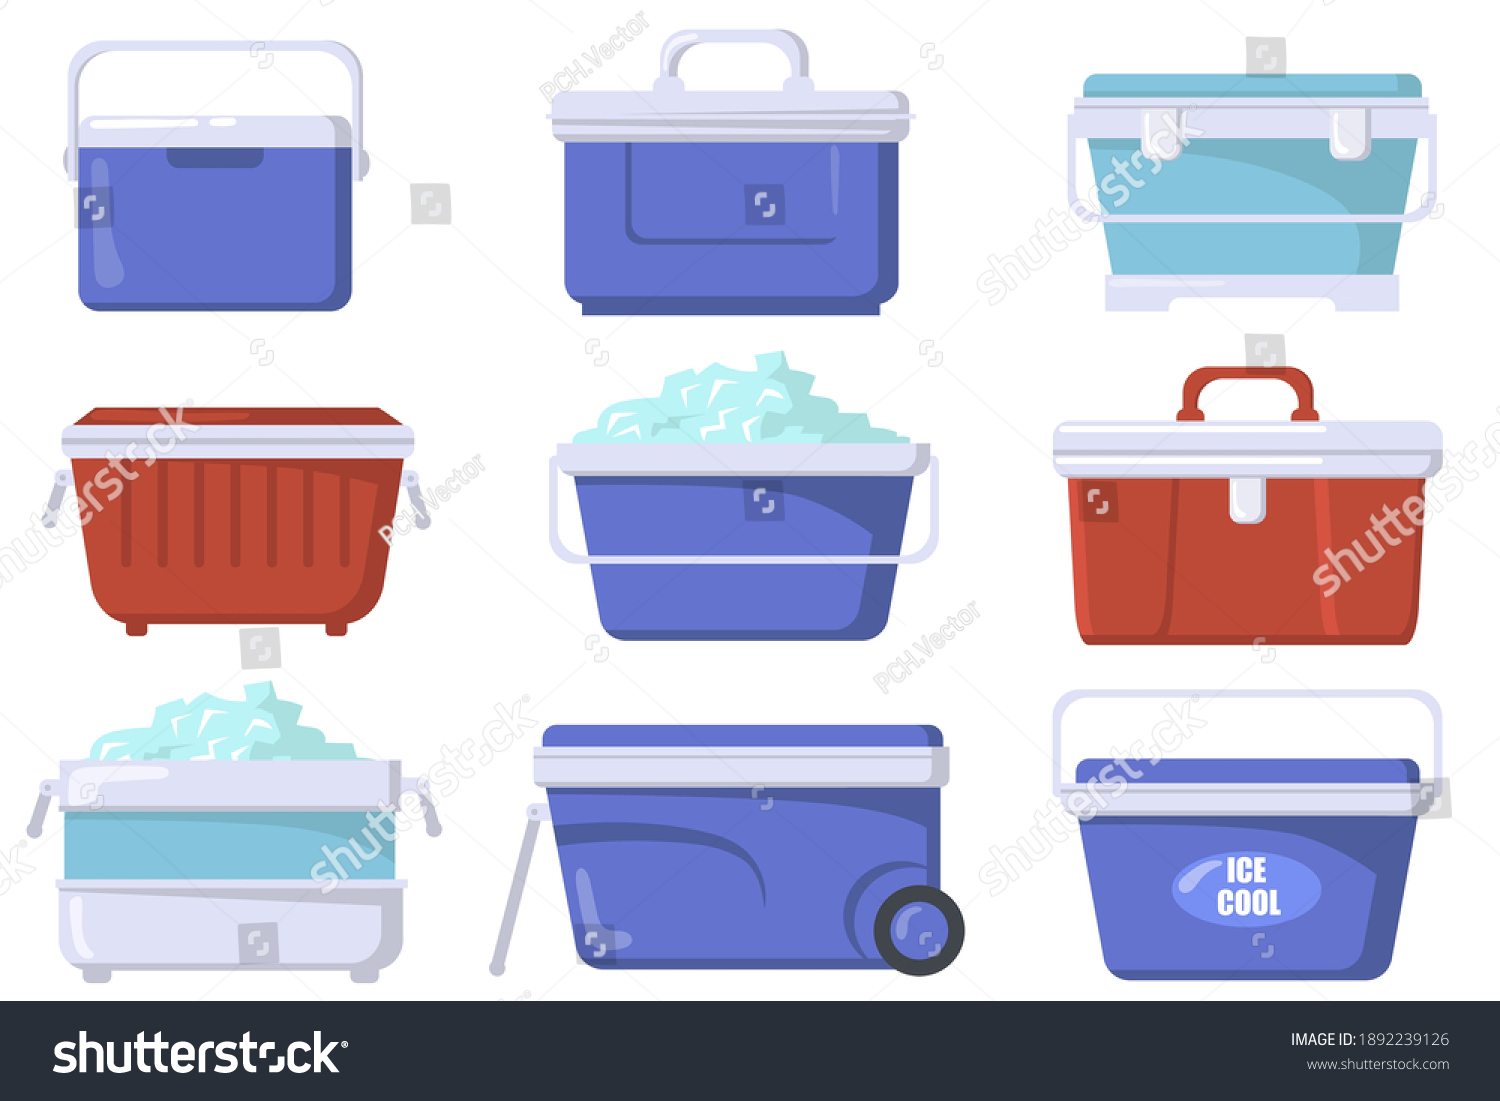 SVG of Handheld ice cooler boxes flat set for web design. Cartoon iceboxes and containers for picnic isolated vector illustration collection. Camping refrigerators and storage concept svg